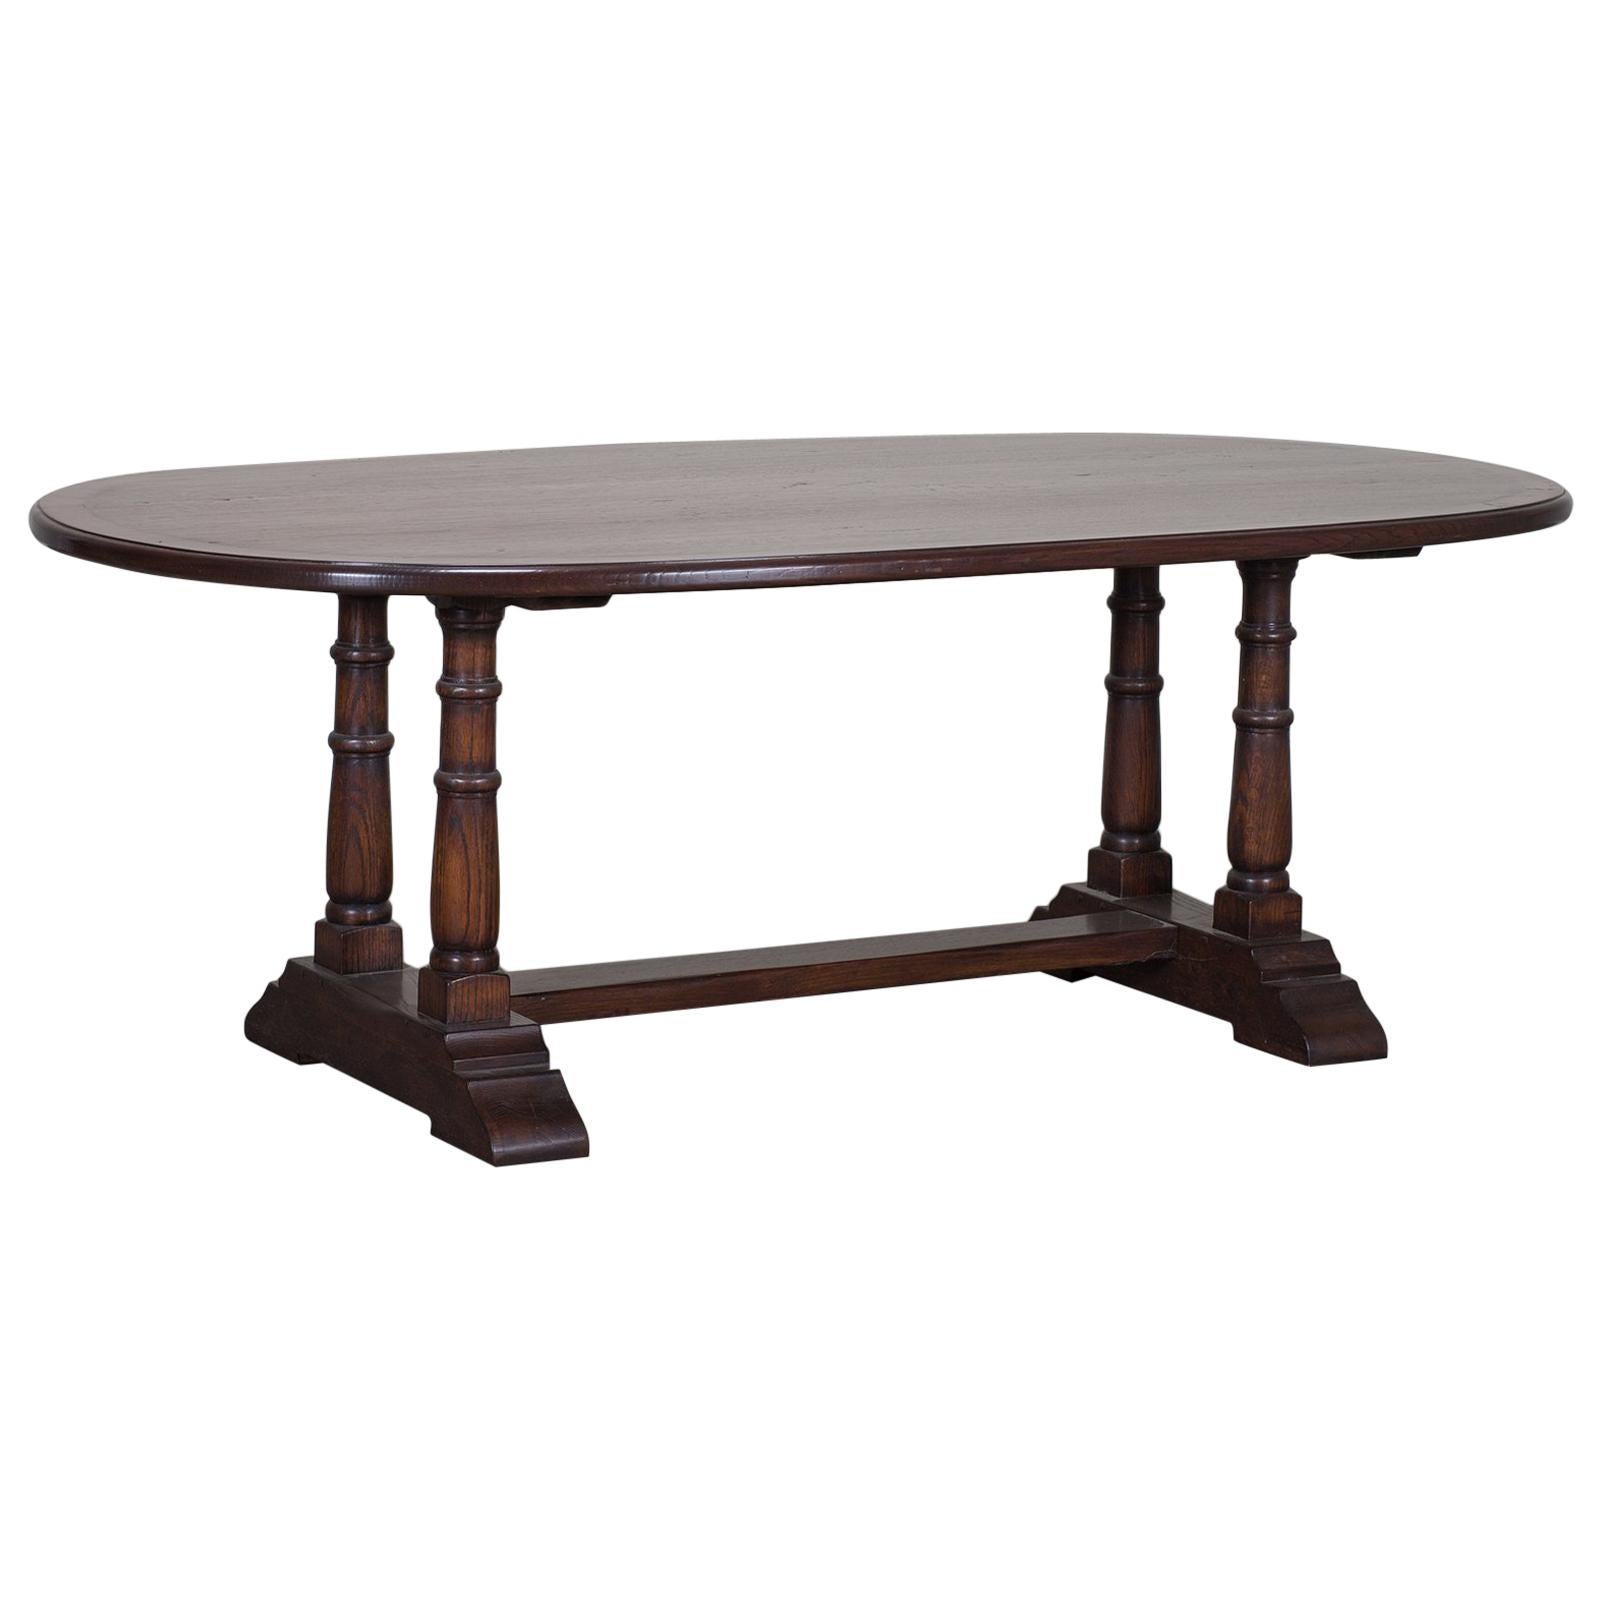 Modern Bespoke English Oval Oak Trestle Dining Table Crossbanded with Yewwood For Sale